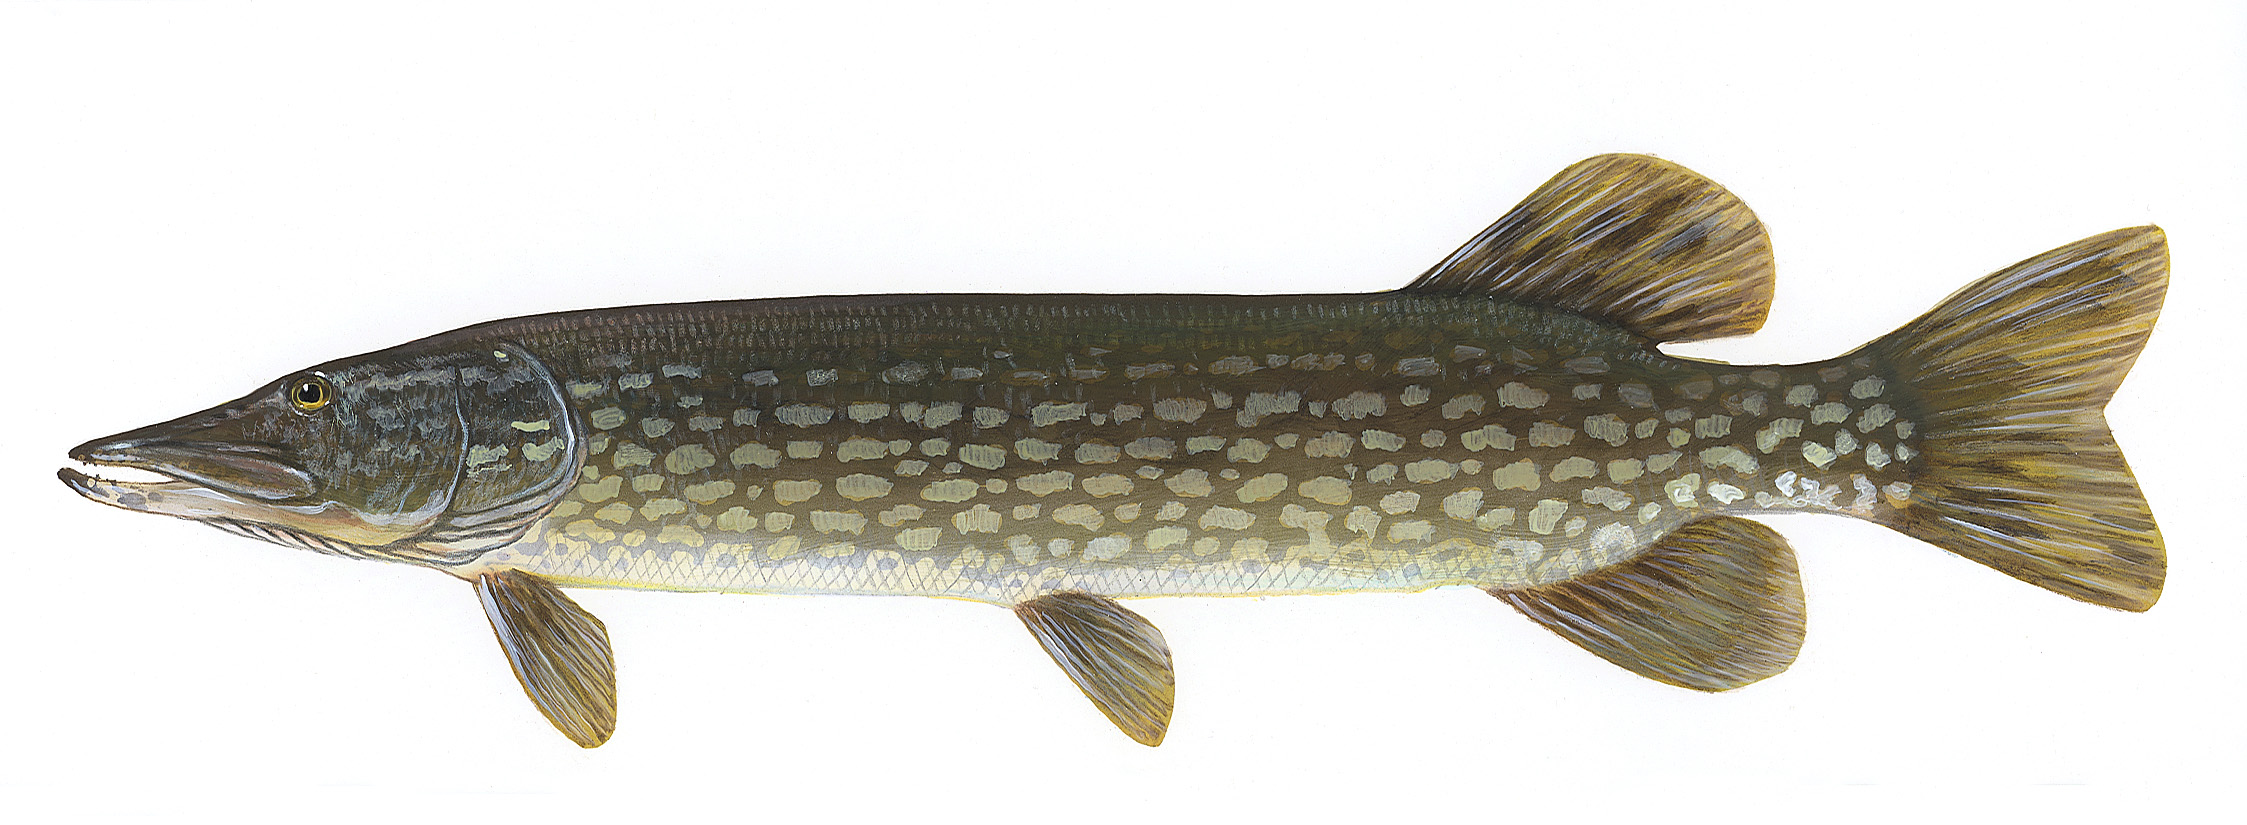 Northern Pike  Esox lucius